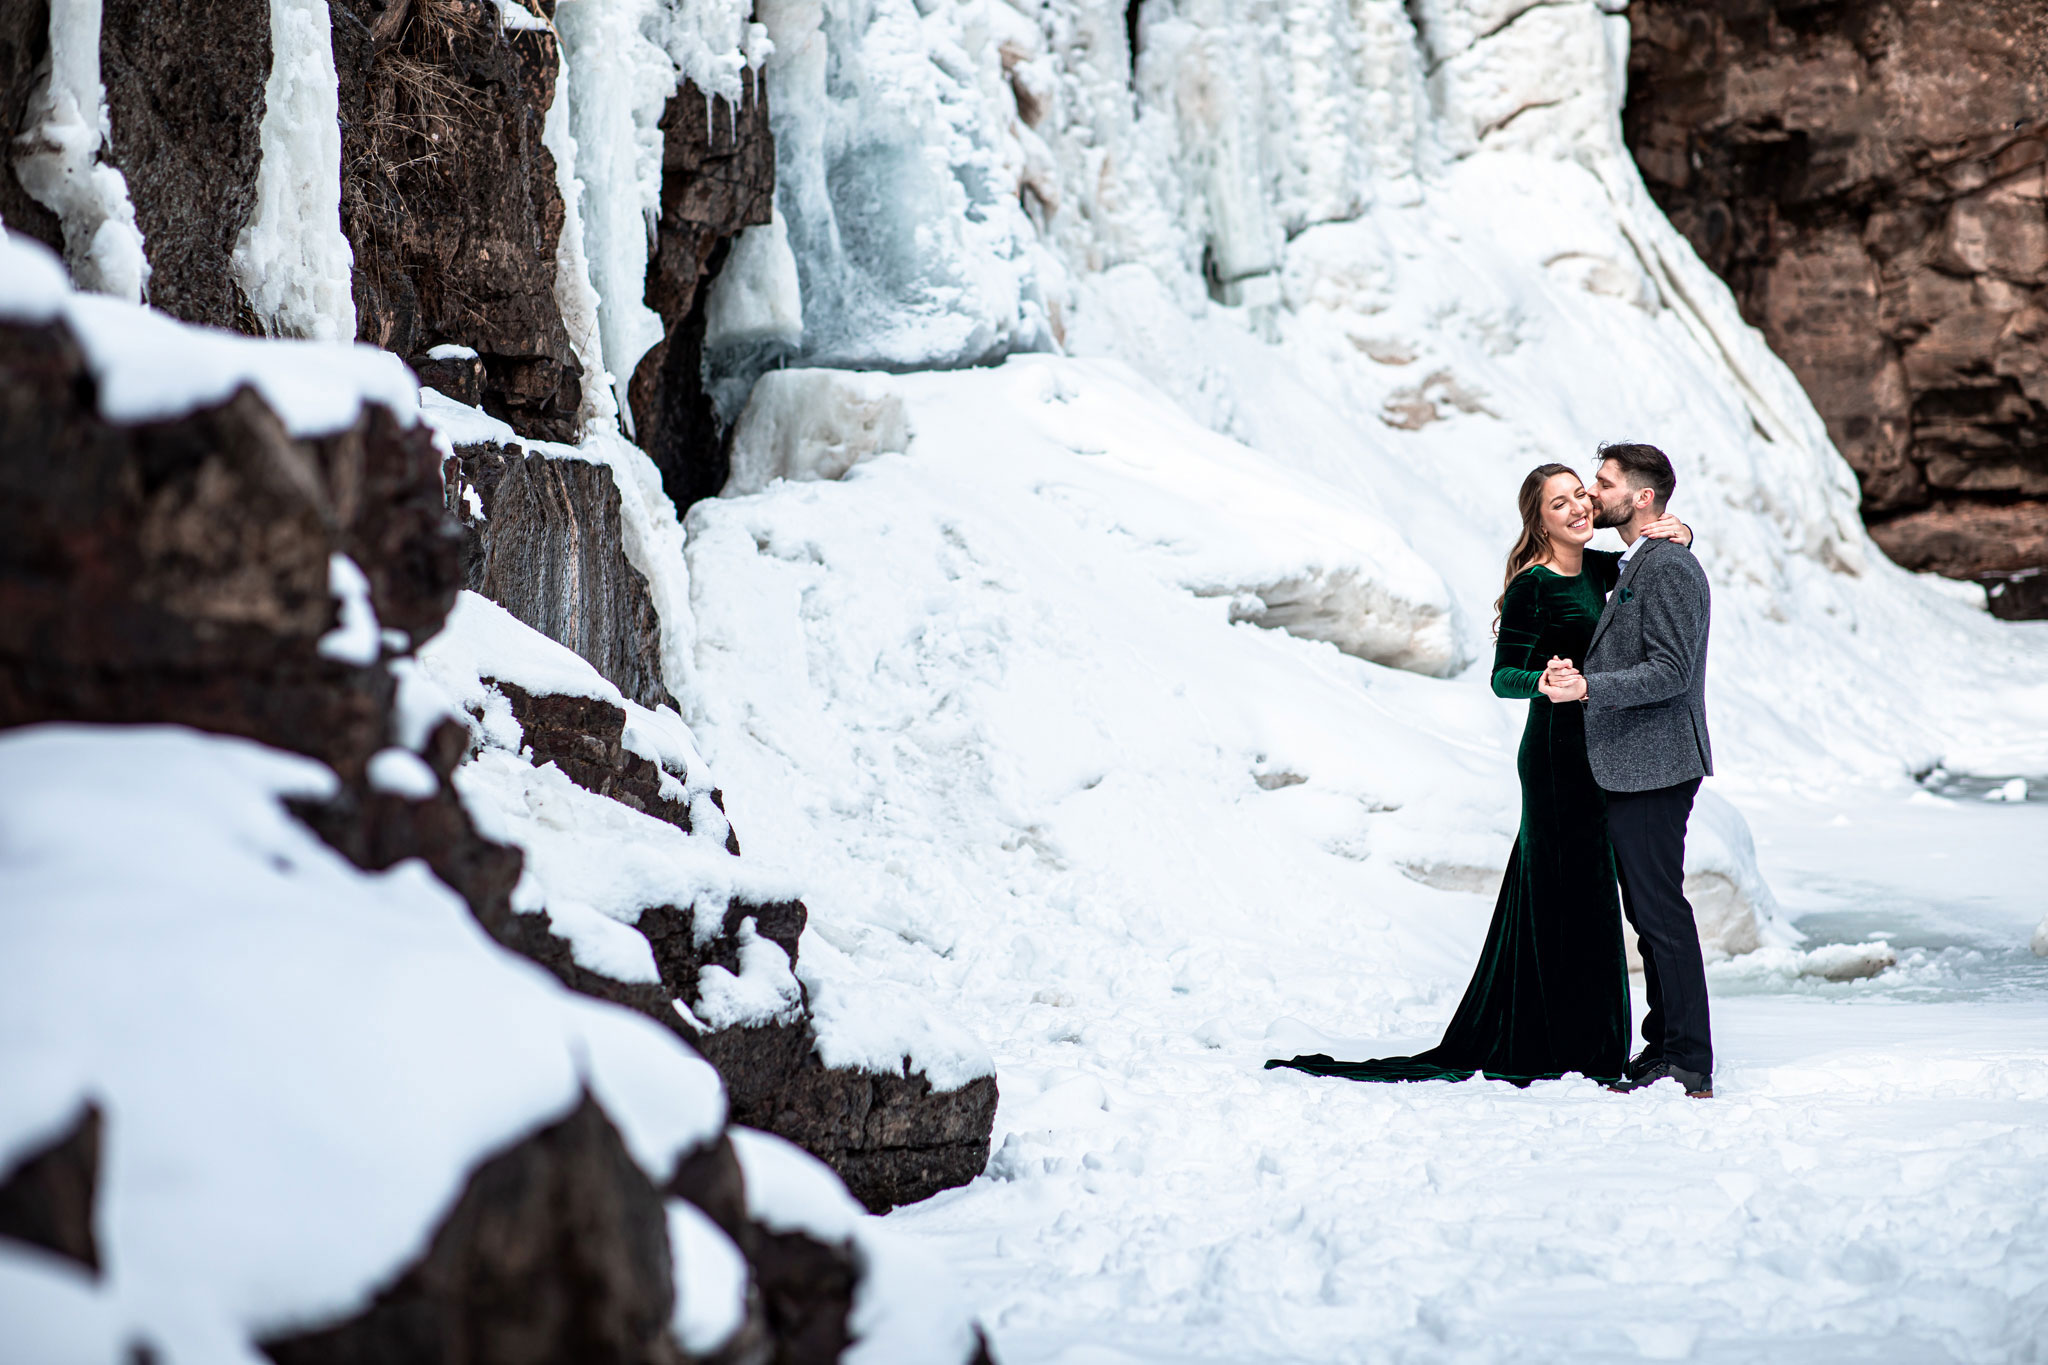 Couple by a frozen waterfall